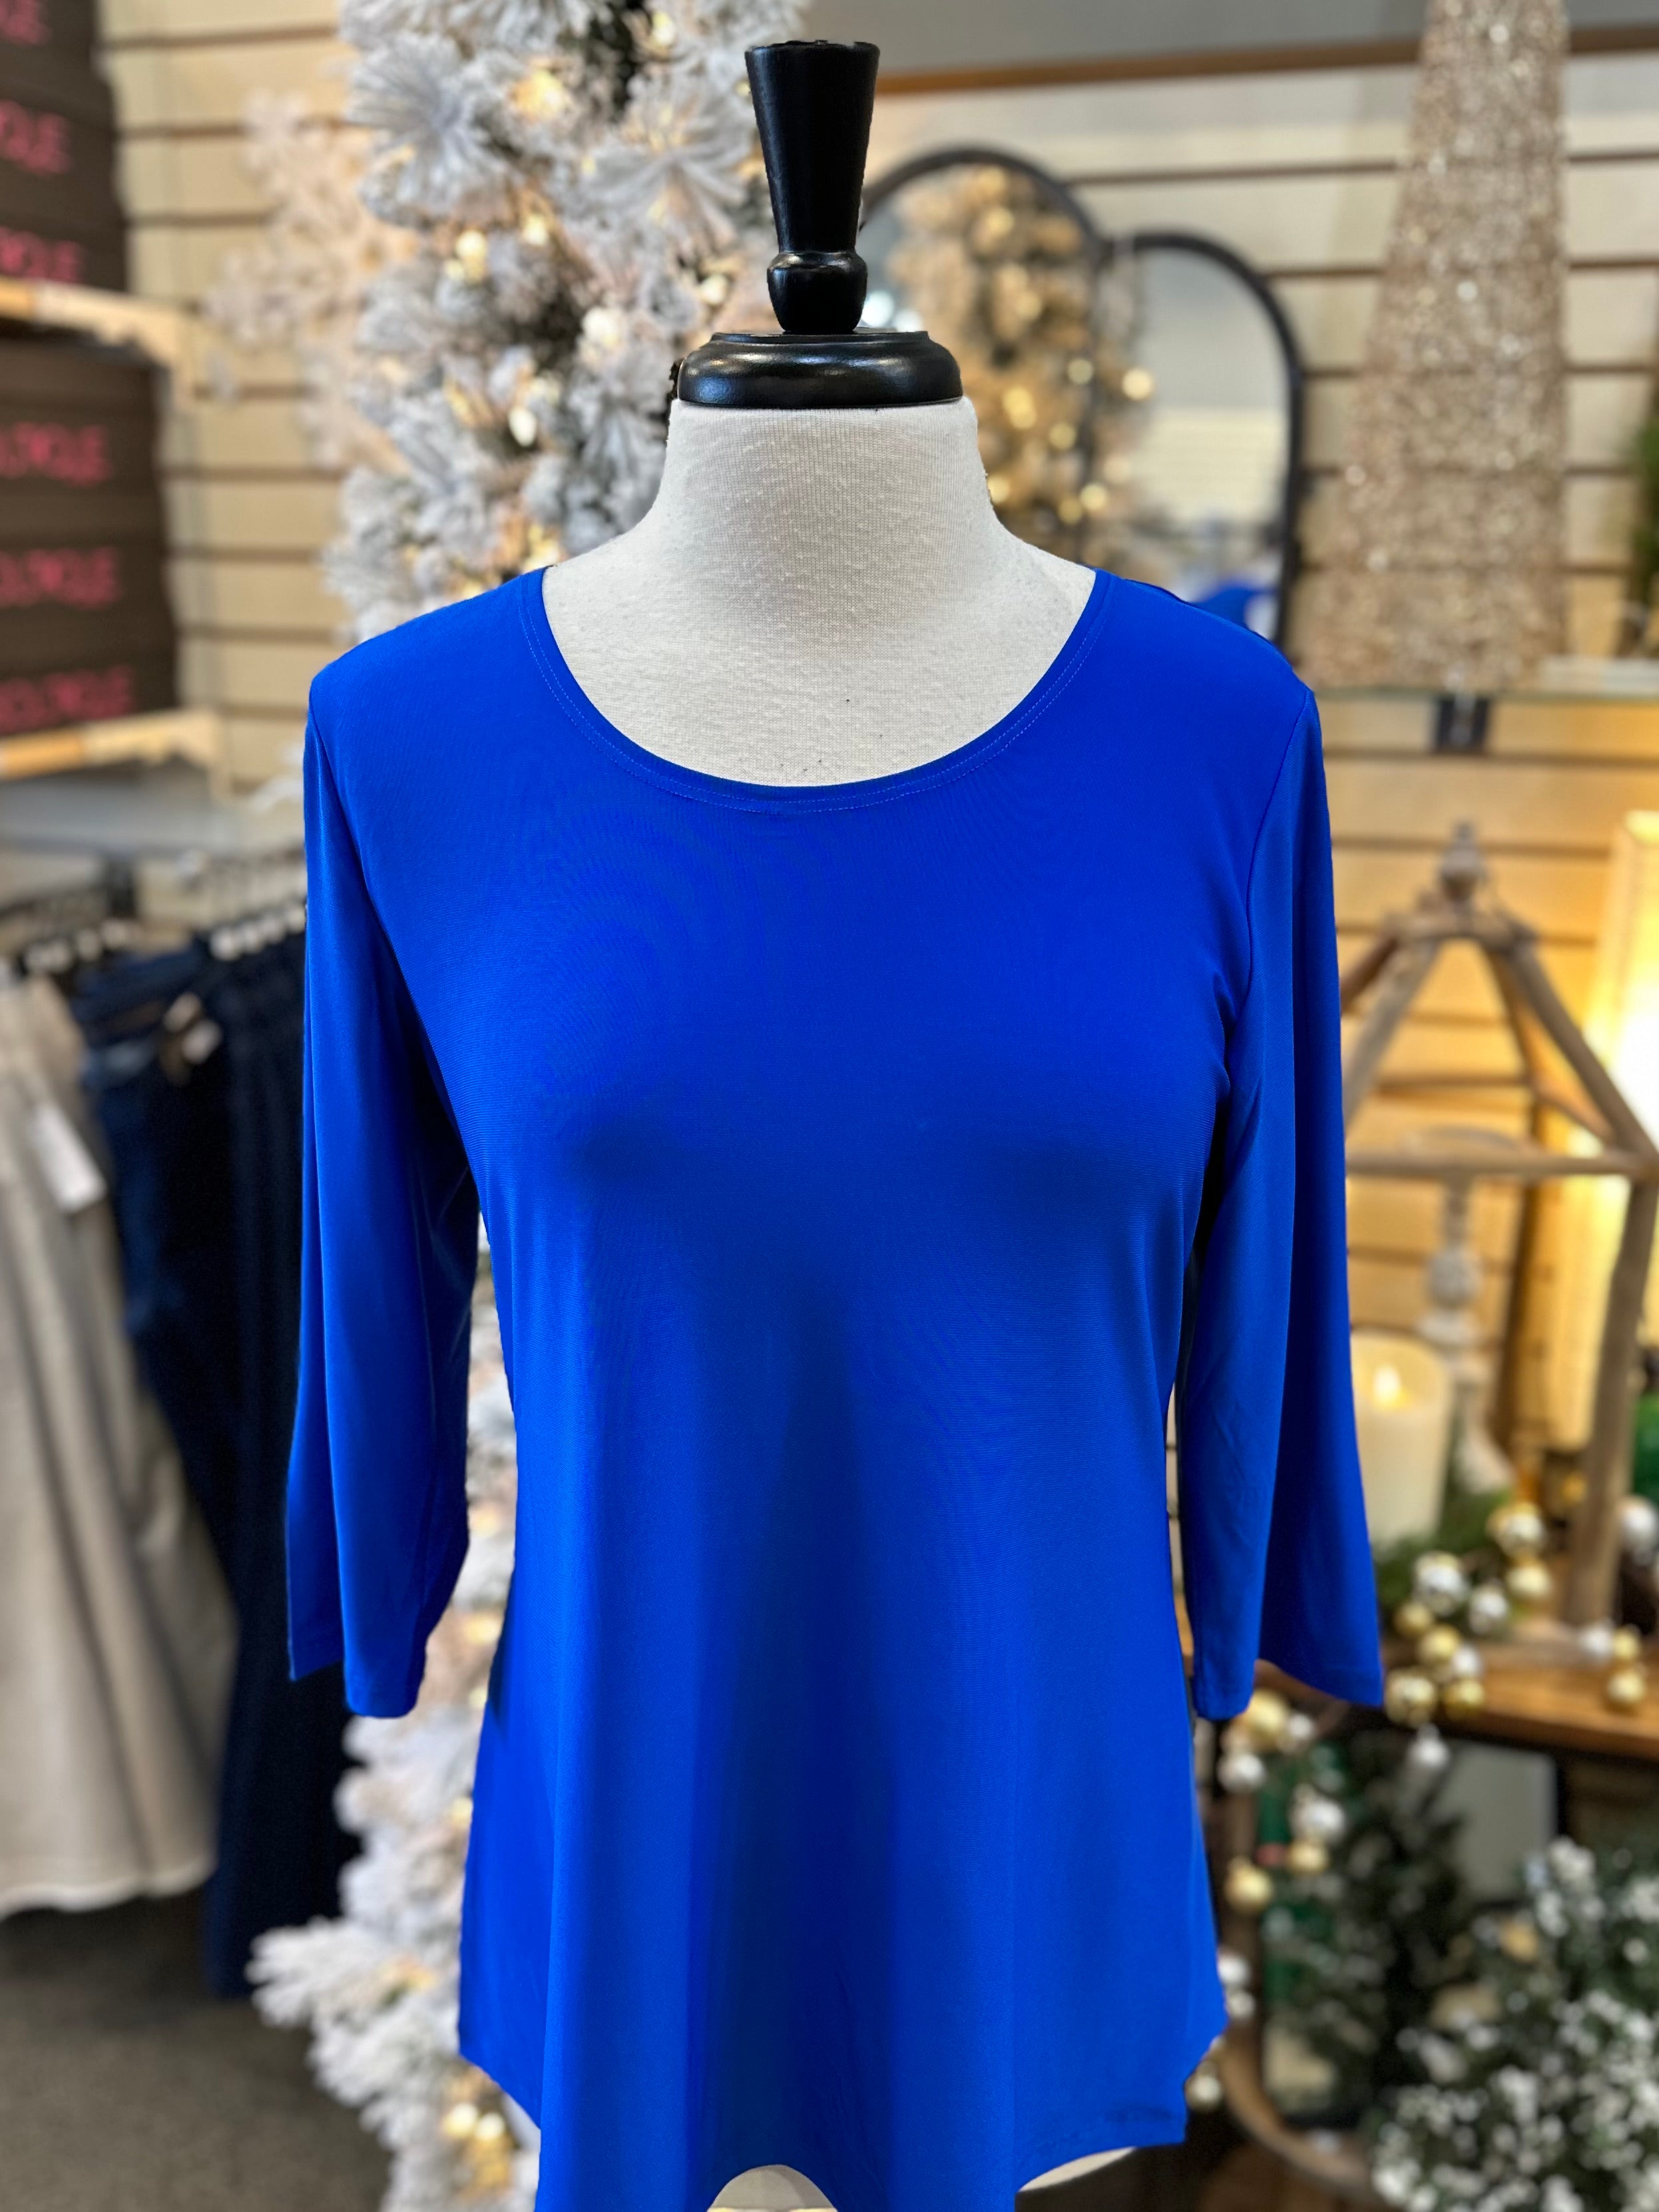 Royal Blue 3/4 Sleeve Scoop Neck Top by Creation